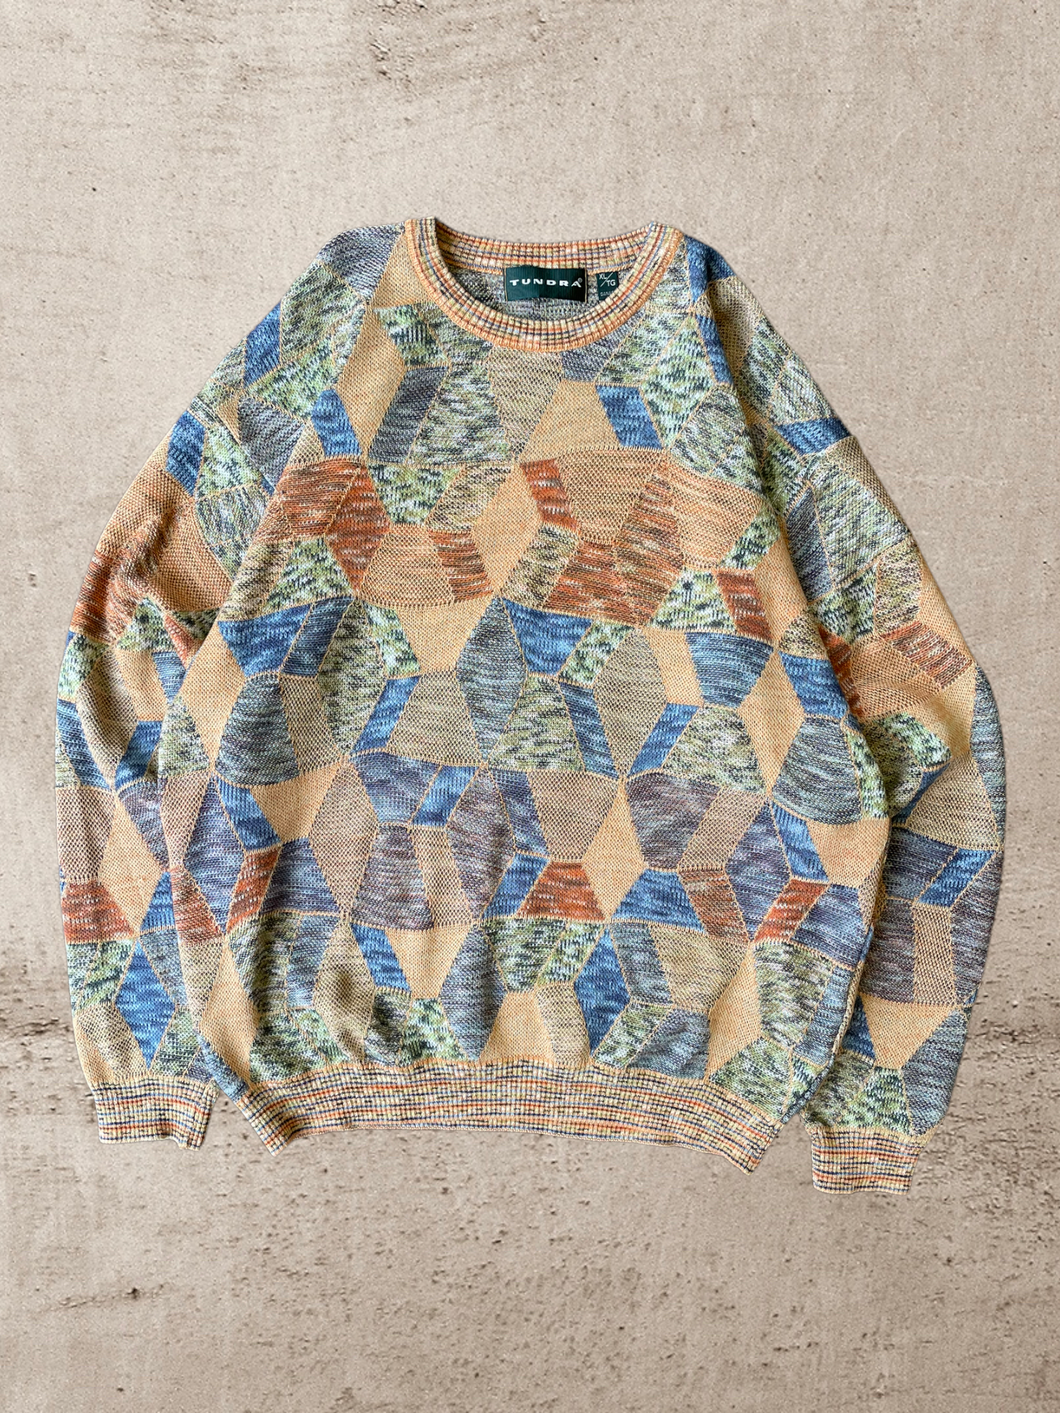 90s Multicolor Knit Tundra Sweater -X-Large